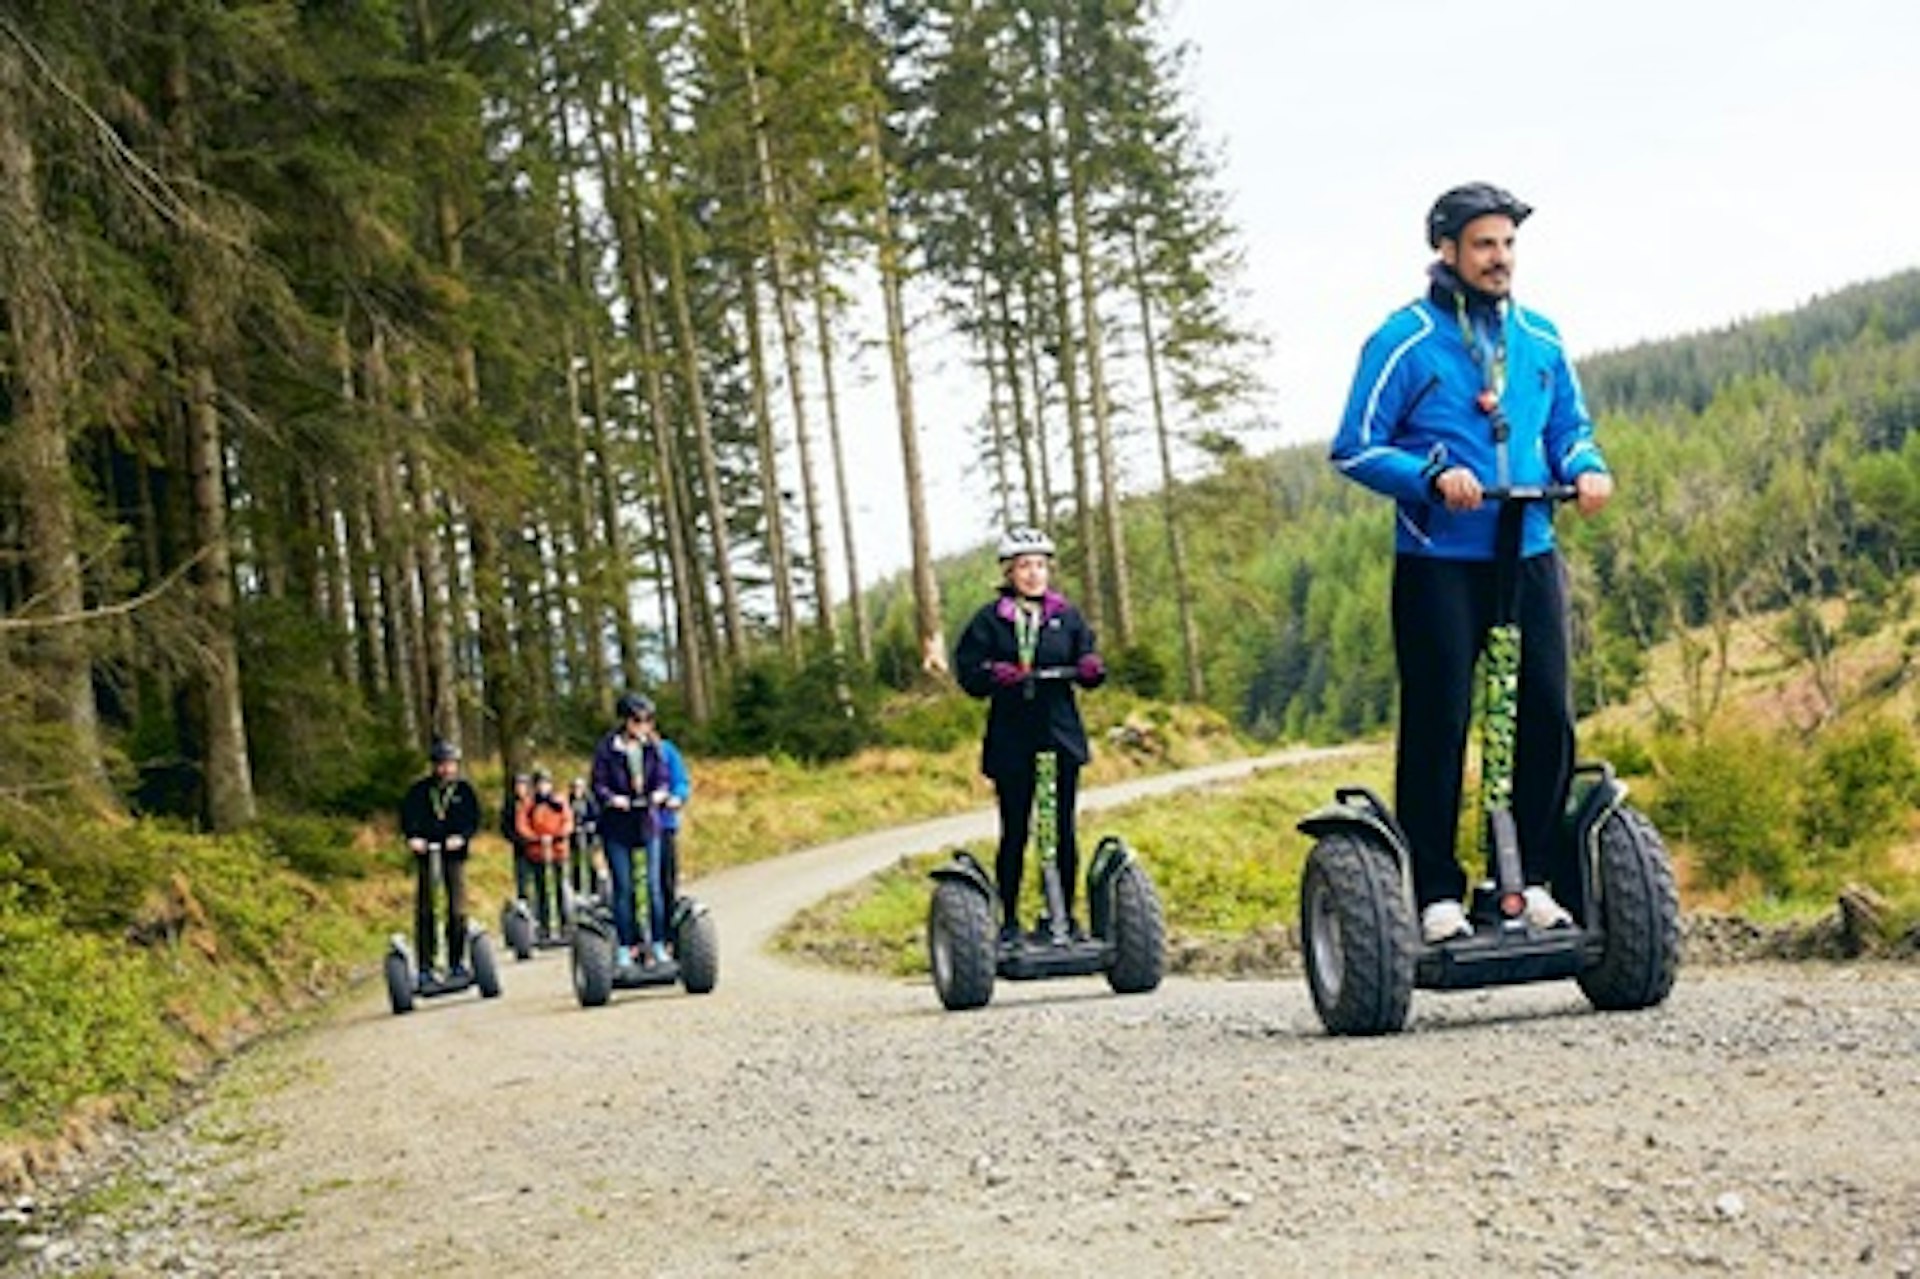 Forest Segway Adventure for One with Go Ape 3